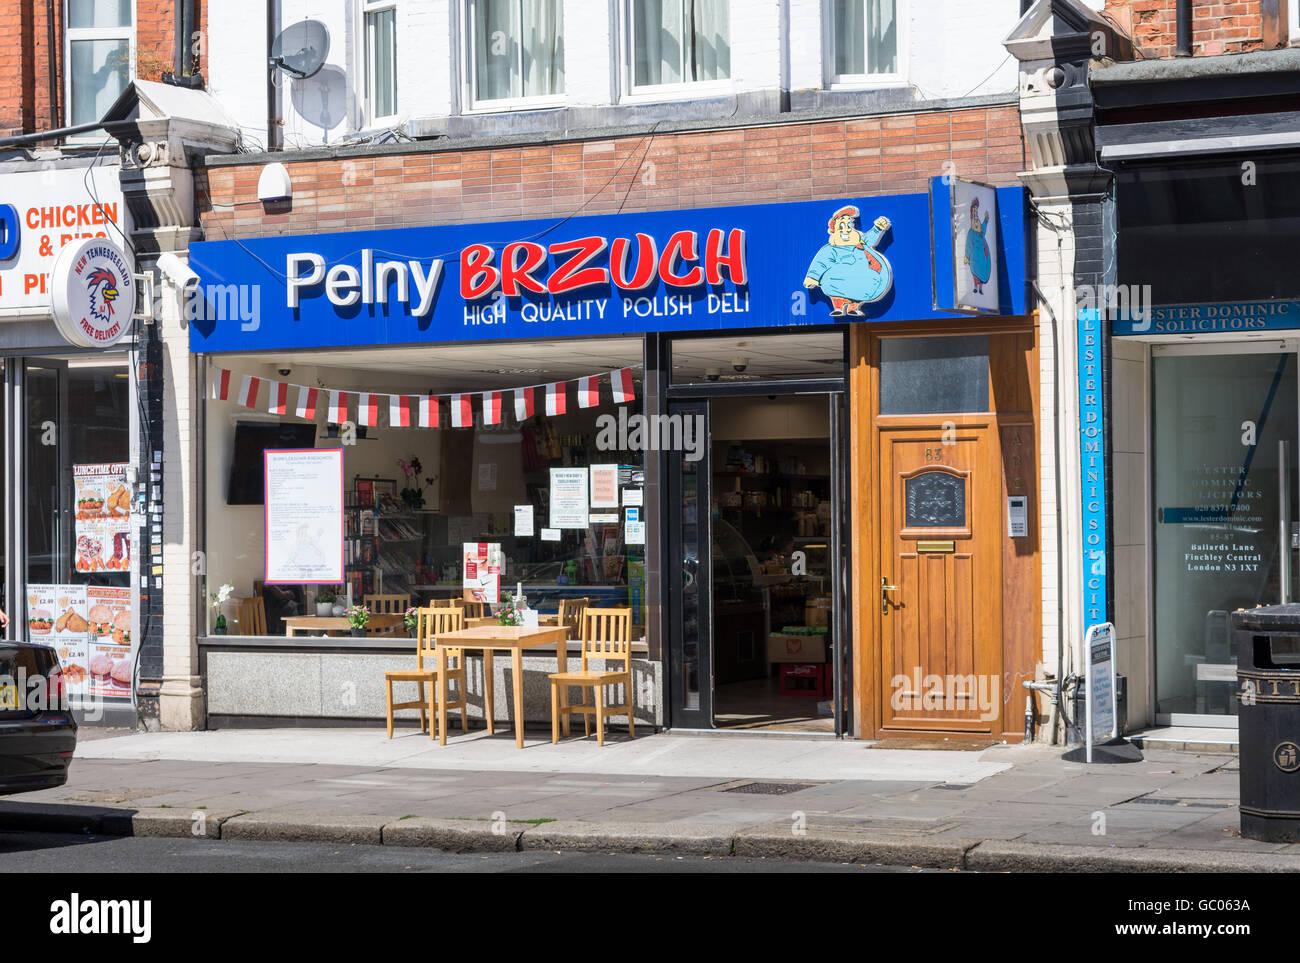 Front view of Polish Grocery Store /Delicatessen in British high street. London suburbs Stock Photo